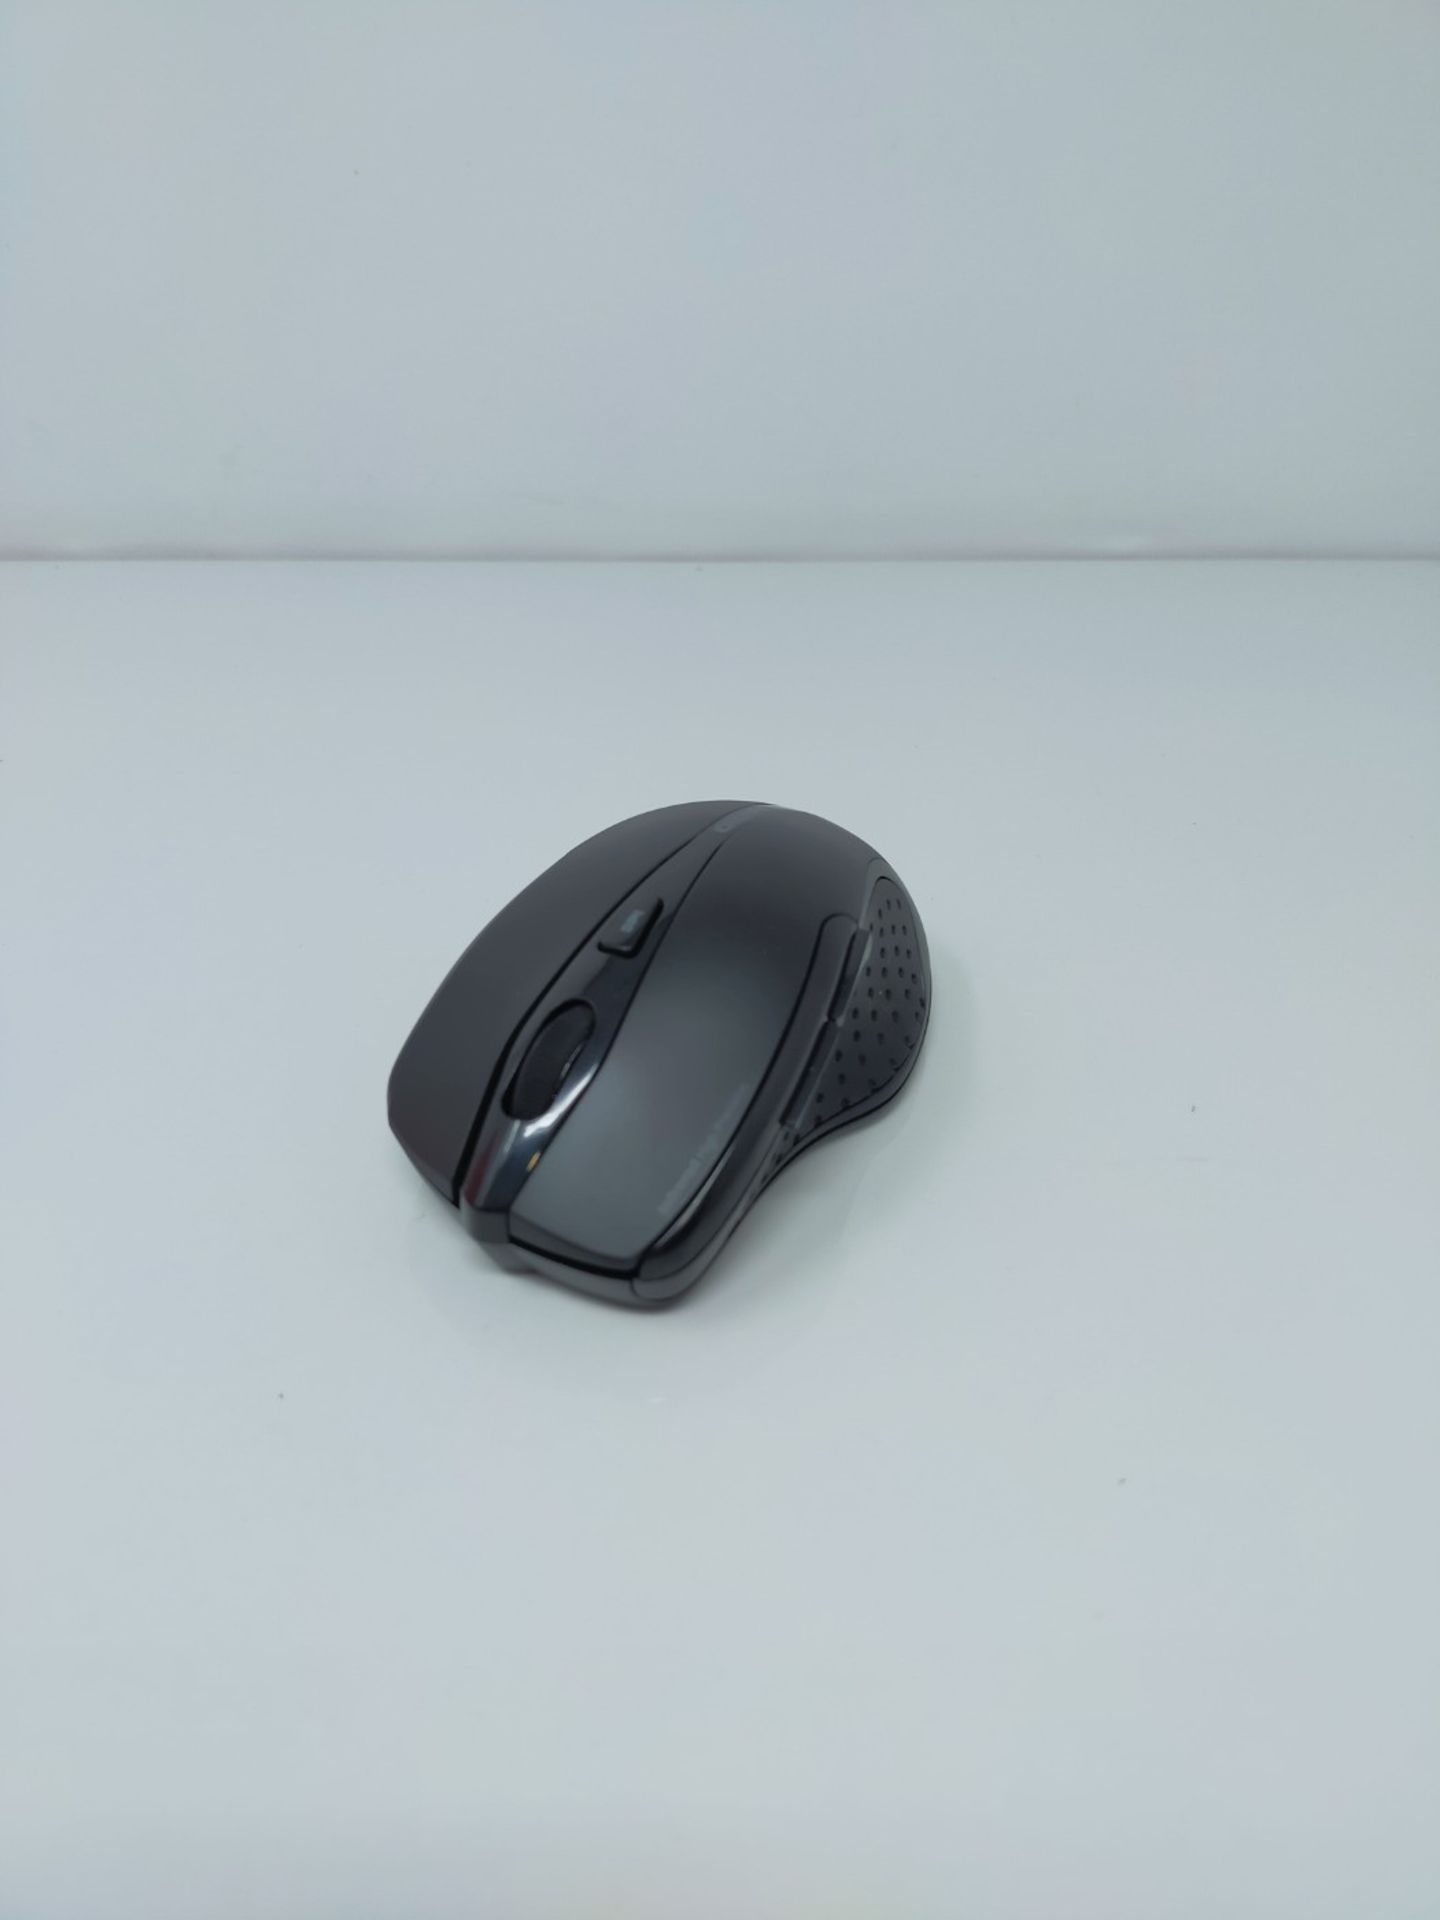 CHERRY MW 300 WIRELESS MOUSE - BLACK - Image 2 of 3